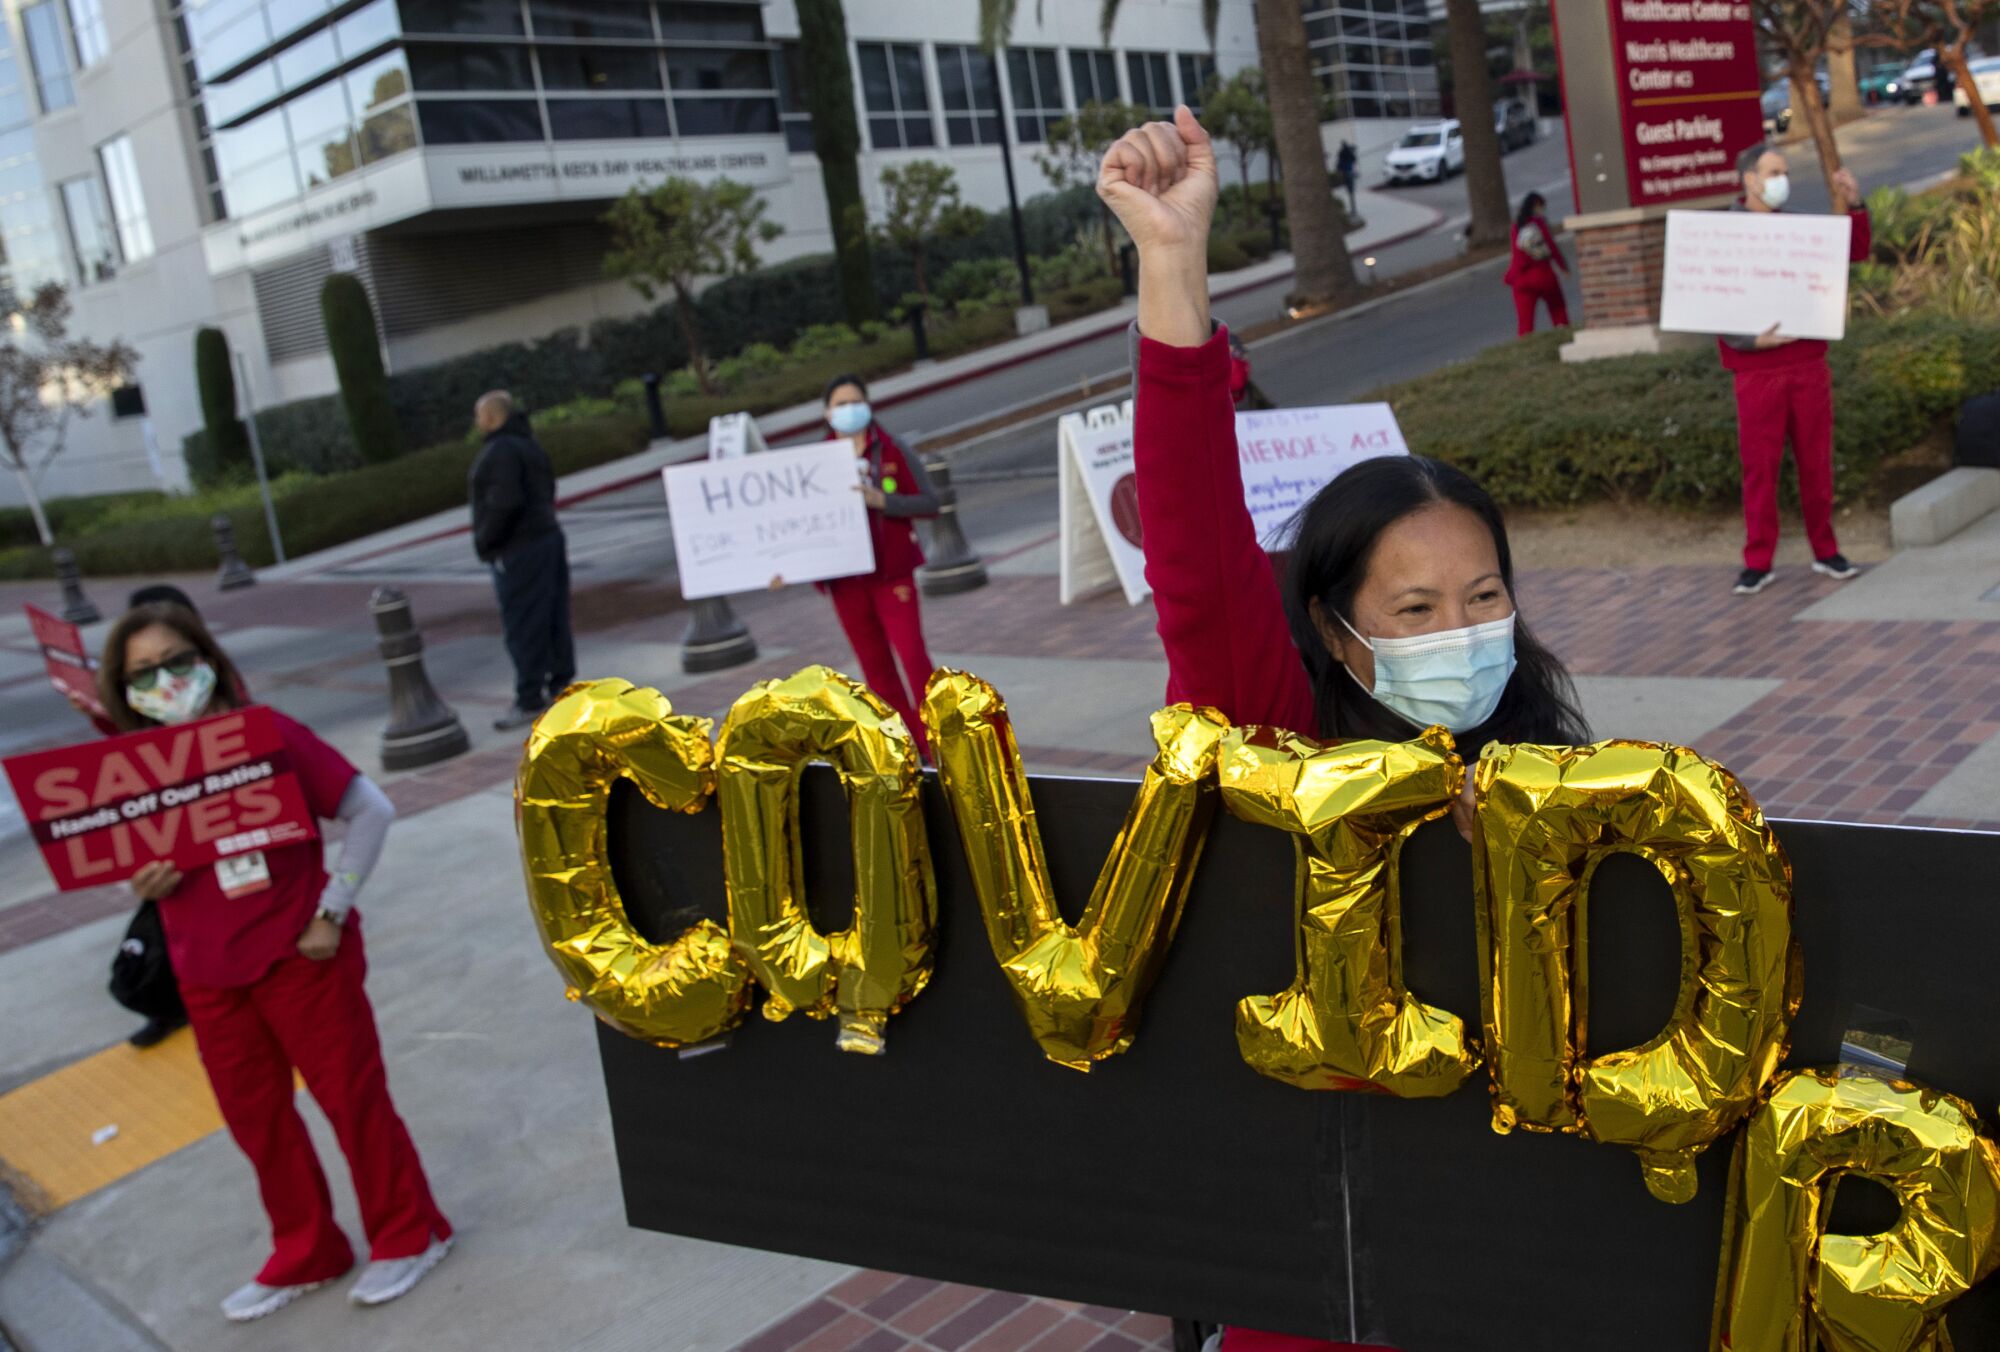 Next to mylar balloons that spell out "COVID," a protesting nurse raises a fist.